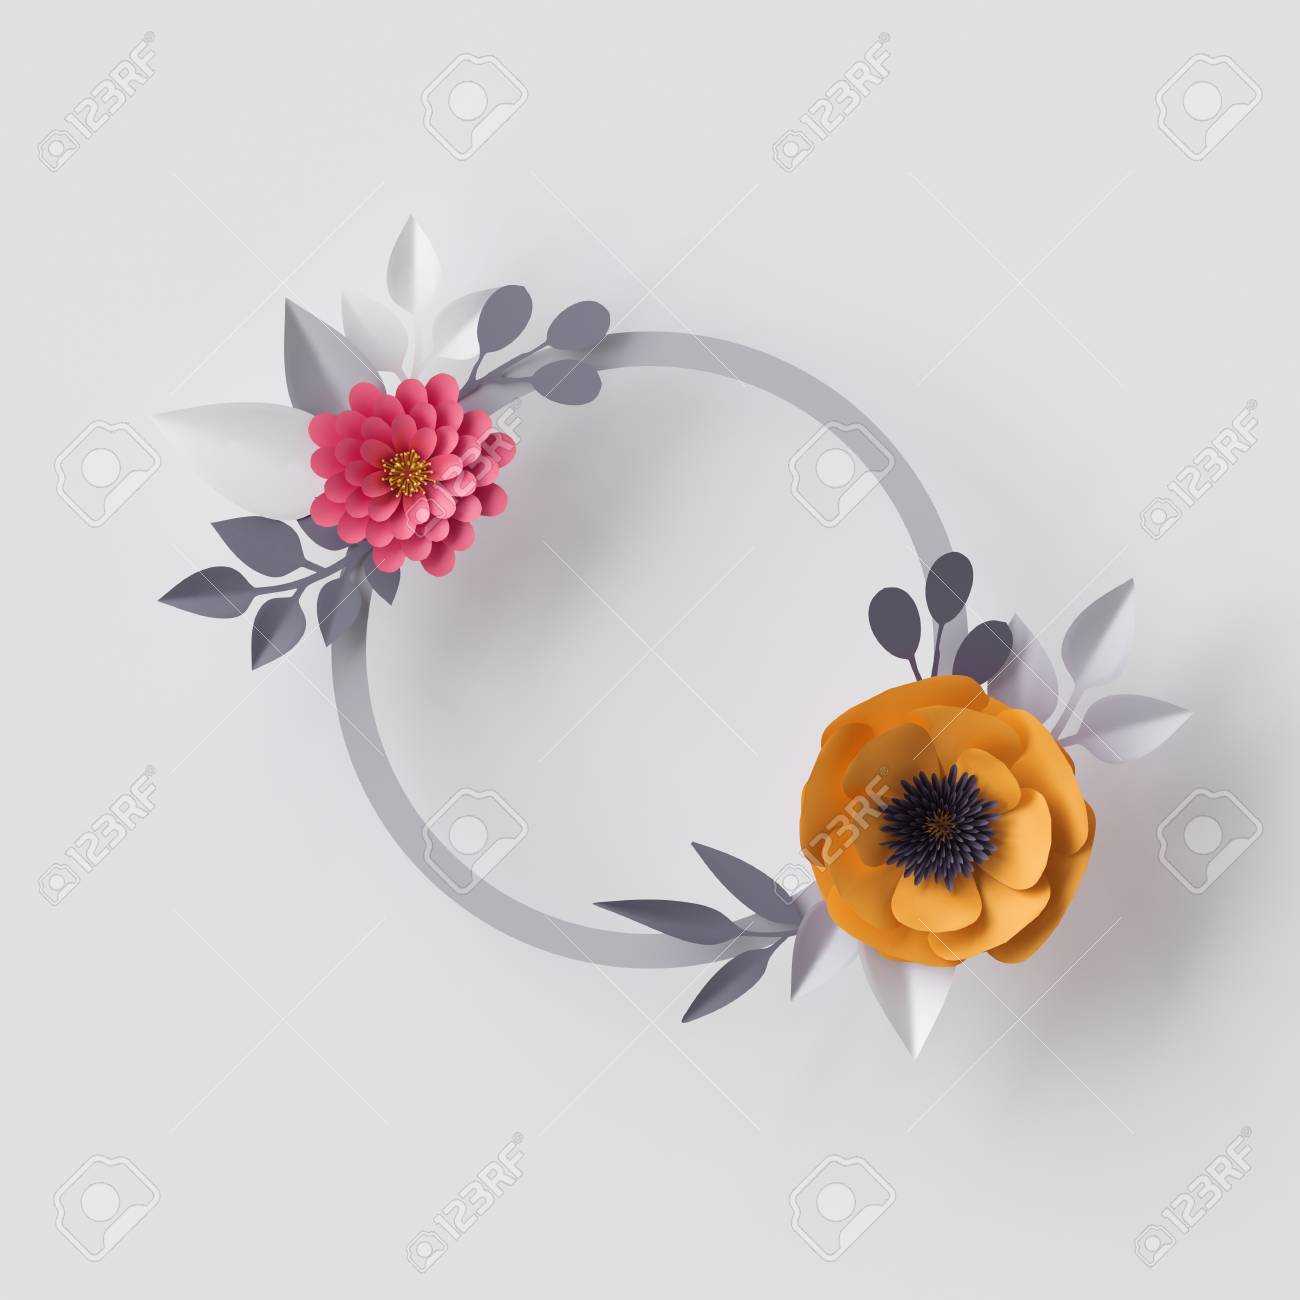 3D Render, Abstract Paper Flowers, Floral Background, Blank Round Frame,  Greeting Card Template With Regard To Headband Card Template